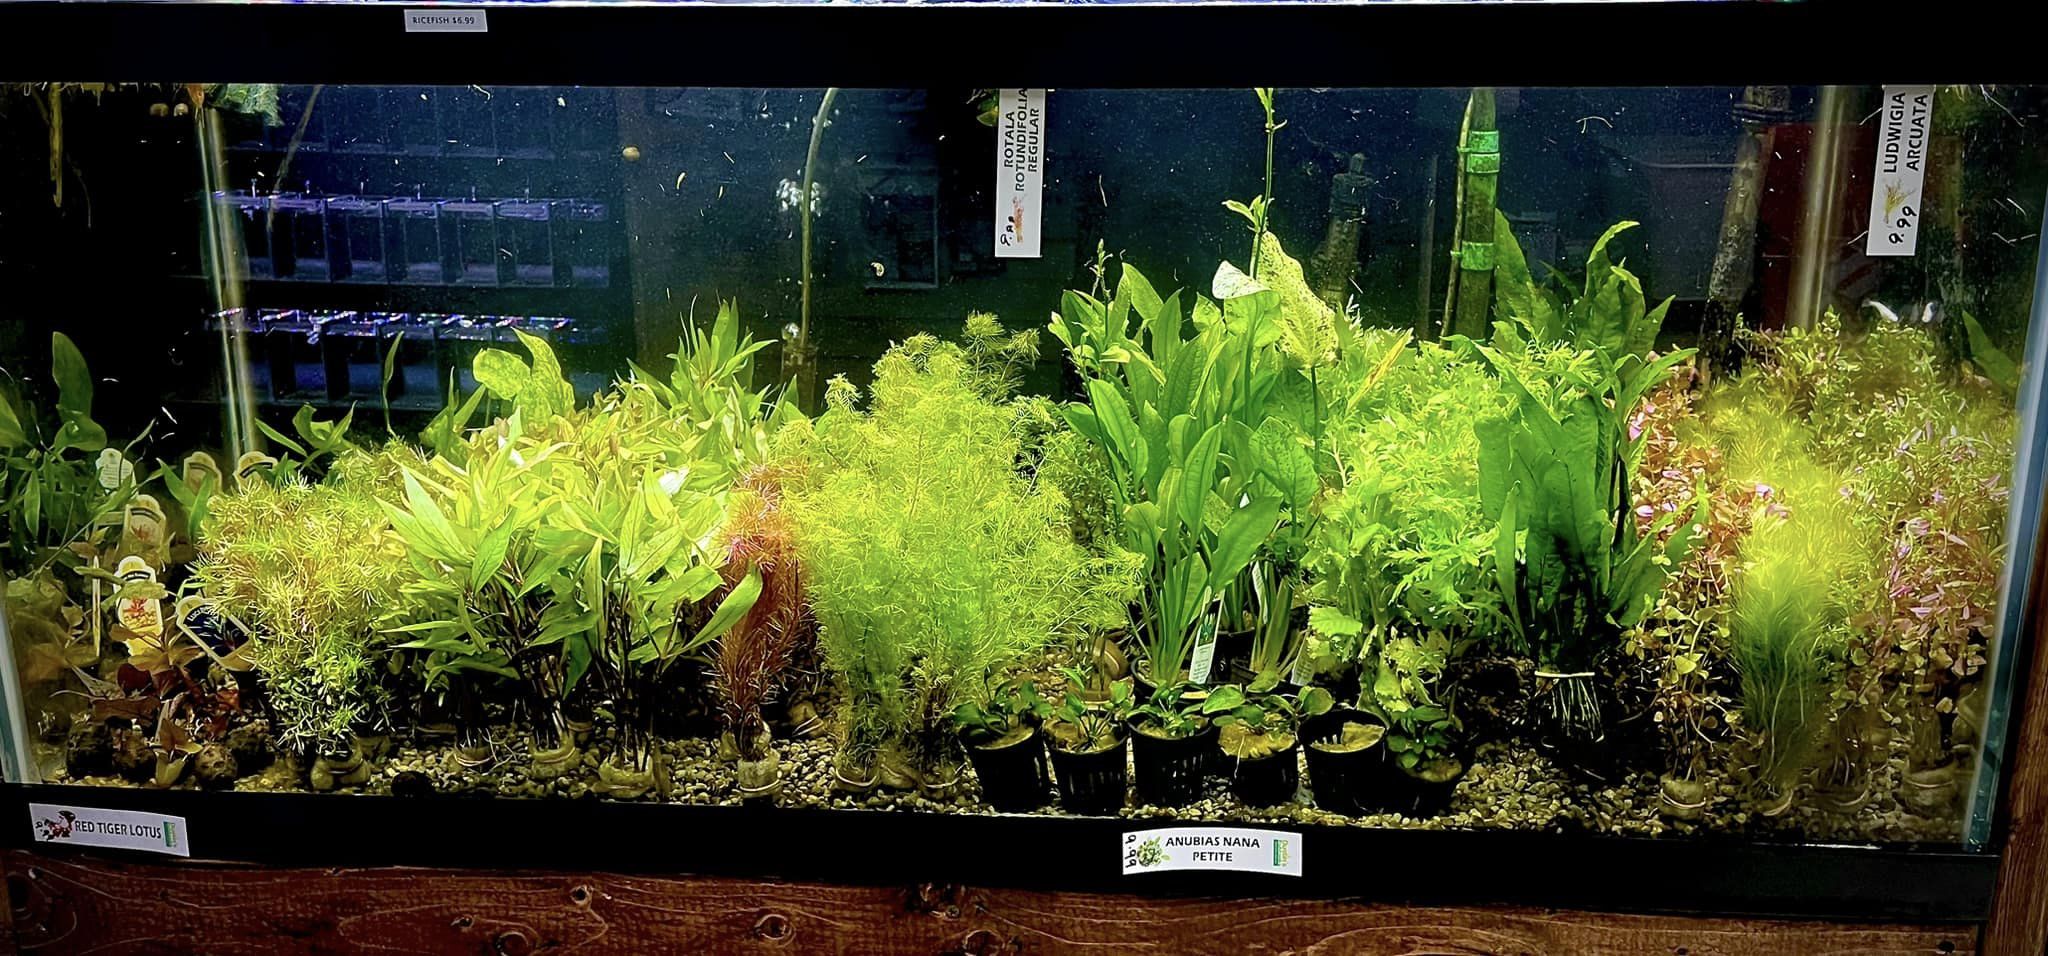 A row of aquatic plants in a freshwater fish tank.